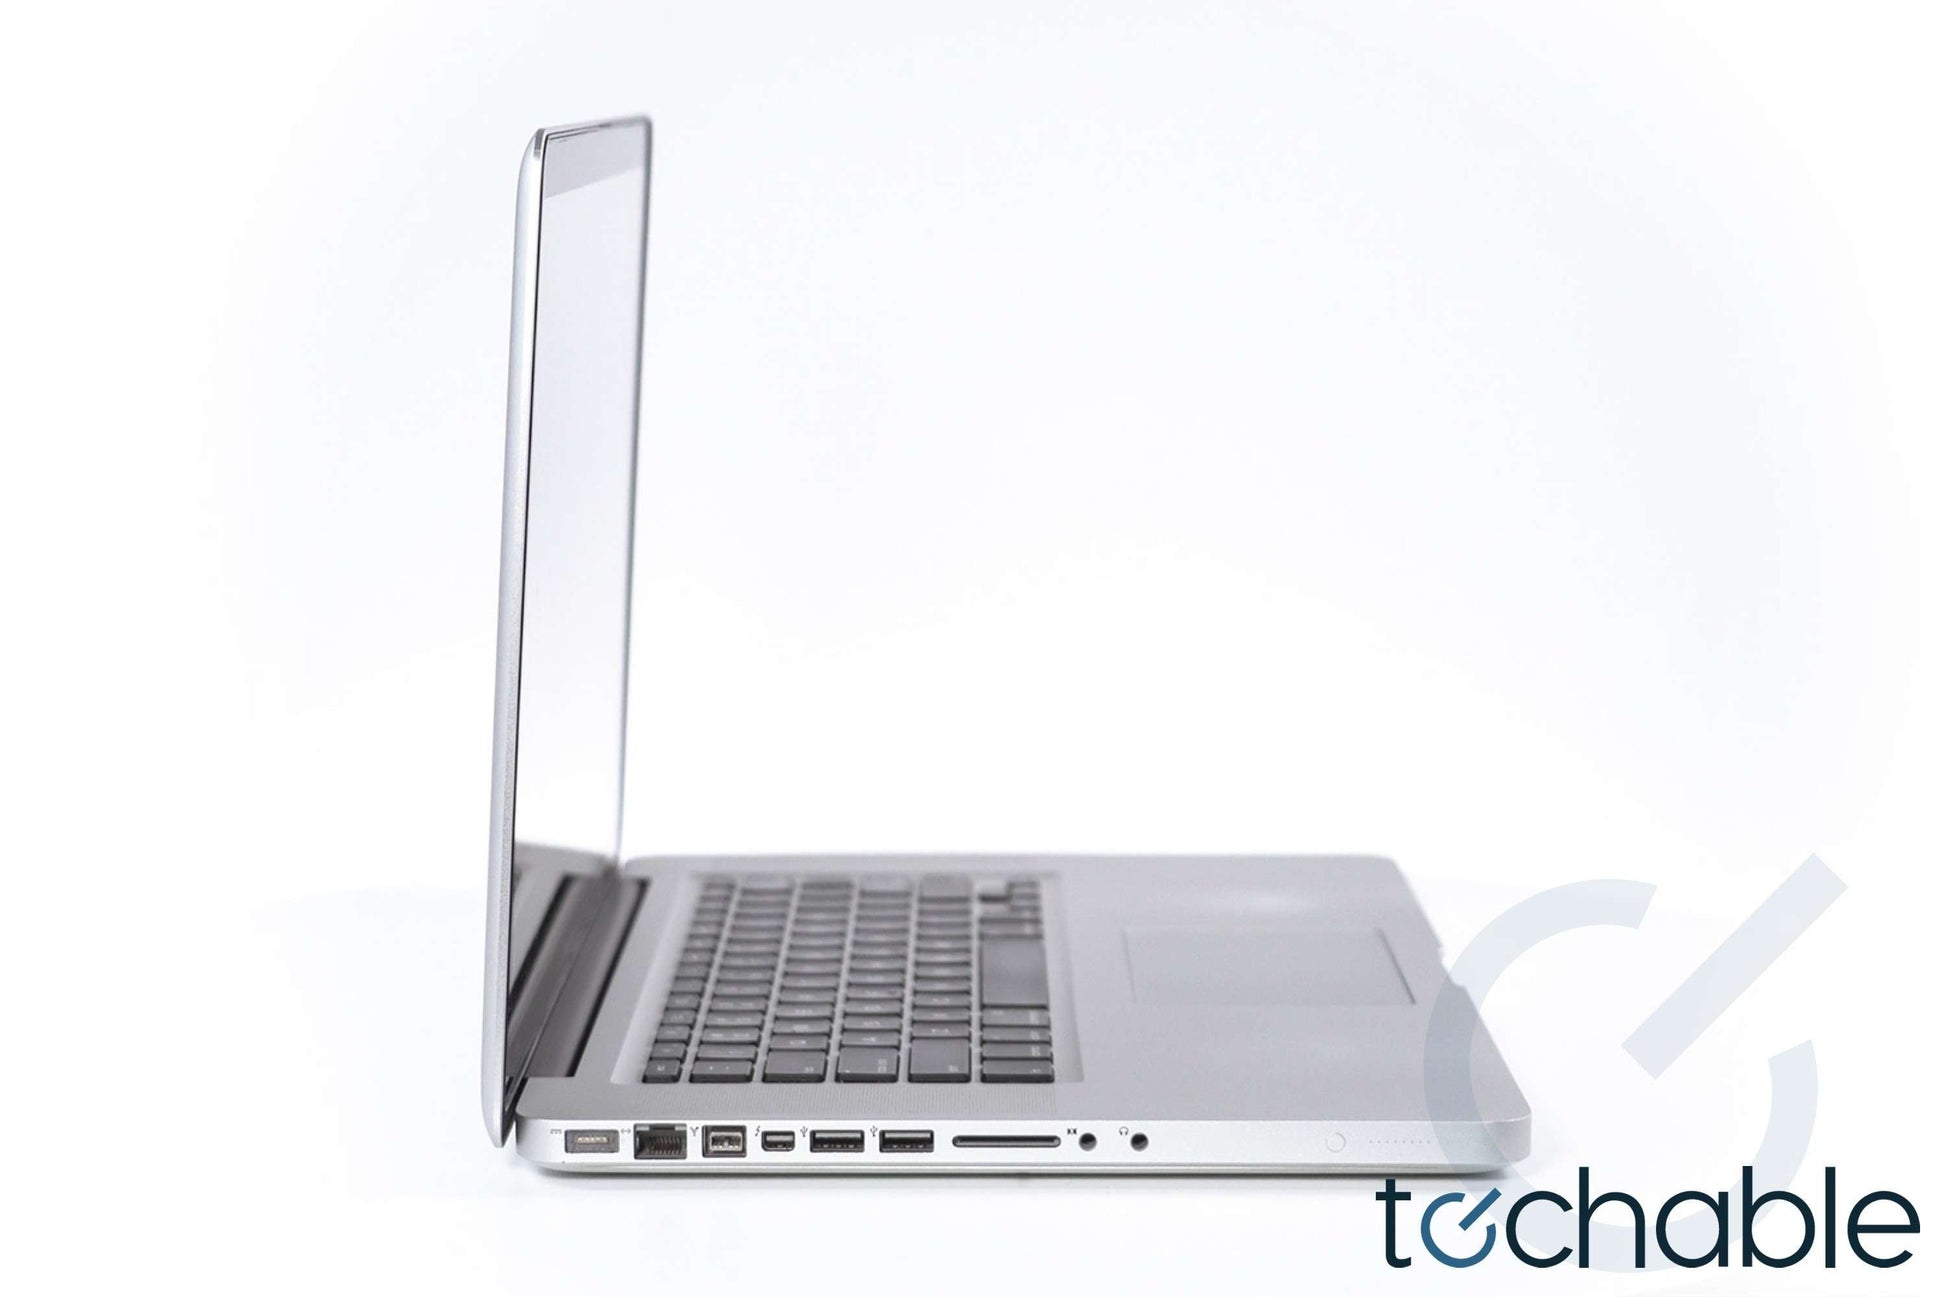 Apple Macbook Pro 17 inch 2.4GHz i7 MD311LL/A Late 2011